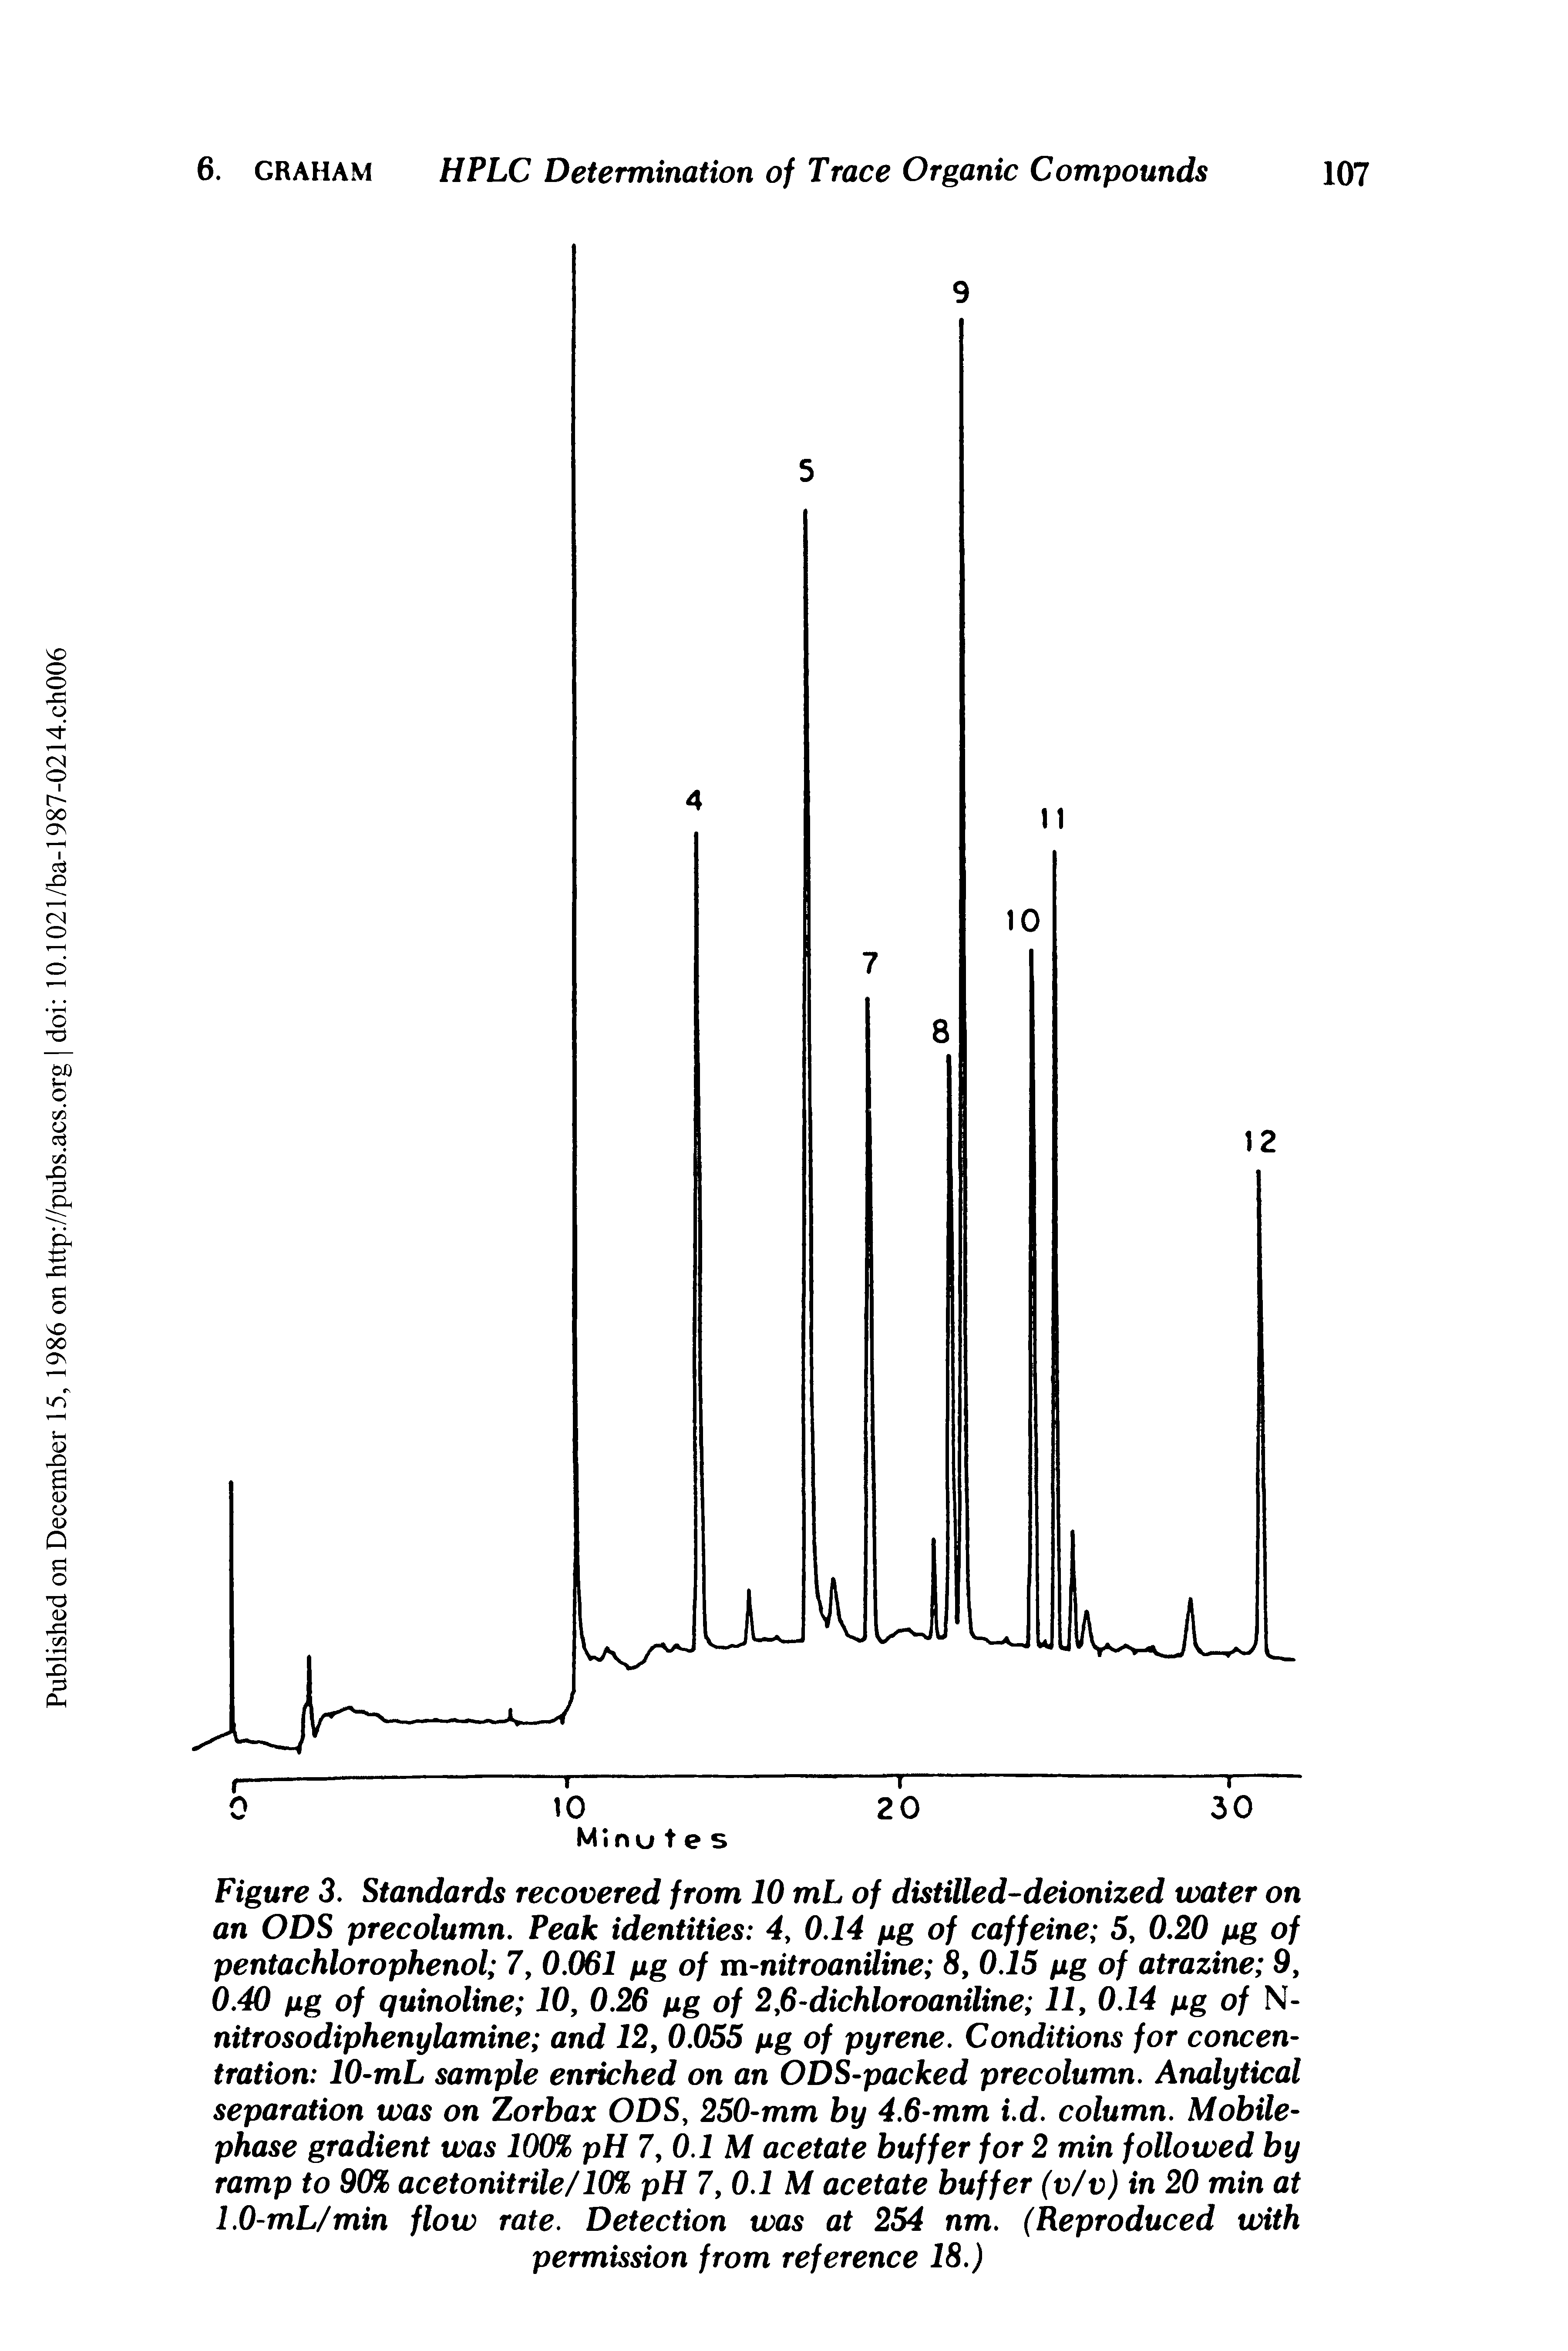 Figure 3. Standards recovered from 10 mL of distilled-deionized water on an ODS precolumn. Peak identities 4, 0.14 pg of caffeine 5, 0.20 pg of pentachlorophenol 7, 0.061 pg of m-nitroandine 8, 0.15 pg of atrazine 9, 0.40 pg of quinoline 10, 0.26 pg of 2,6-dichloroaniline 11, 0.14 pg of N-nitrosodiphenylamine and 12, 0.055 pg of pyrene. Conditions for concentration 10-mL sample enriched on an ODS-packed precolumn. Analytical separation was on Zorbax ODS, 250-mm by 4.6-mm i.d. column. Mobile-phase gradient was 100% pH 7,0.1 M acetate buffer for 2 min followed by ramp to 90% acetonitrile/10% pH 7, 0.1 M acetate buffer (v/v) in 20 min at 1.0-mL/min flow rate. Detection was at 254 nm. (Reproduced with permission from reference 18.)...